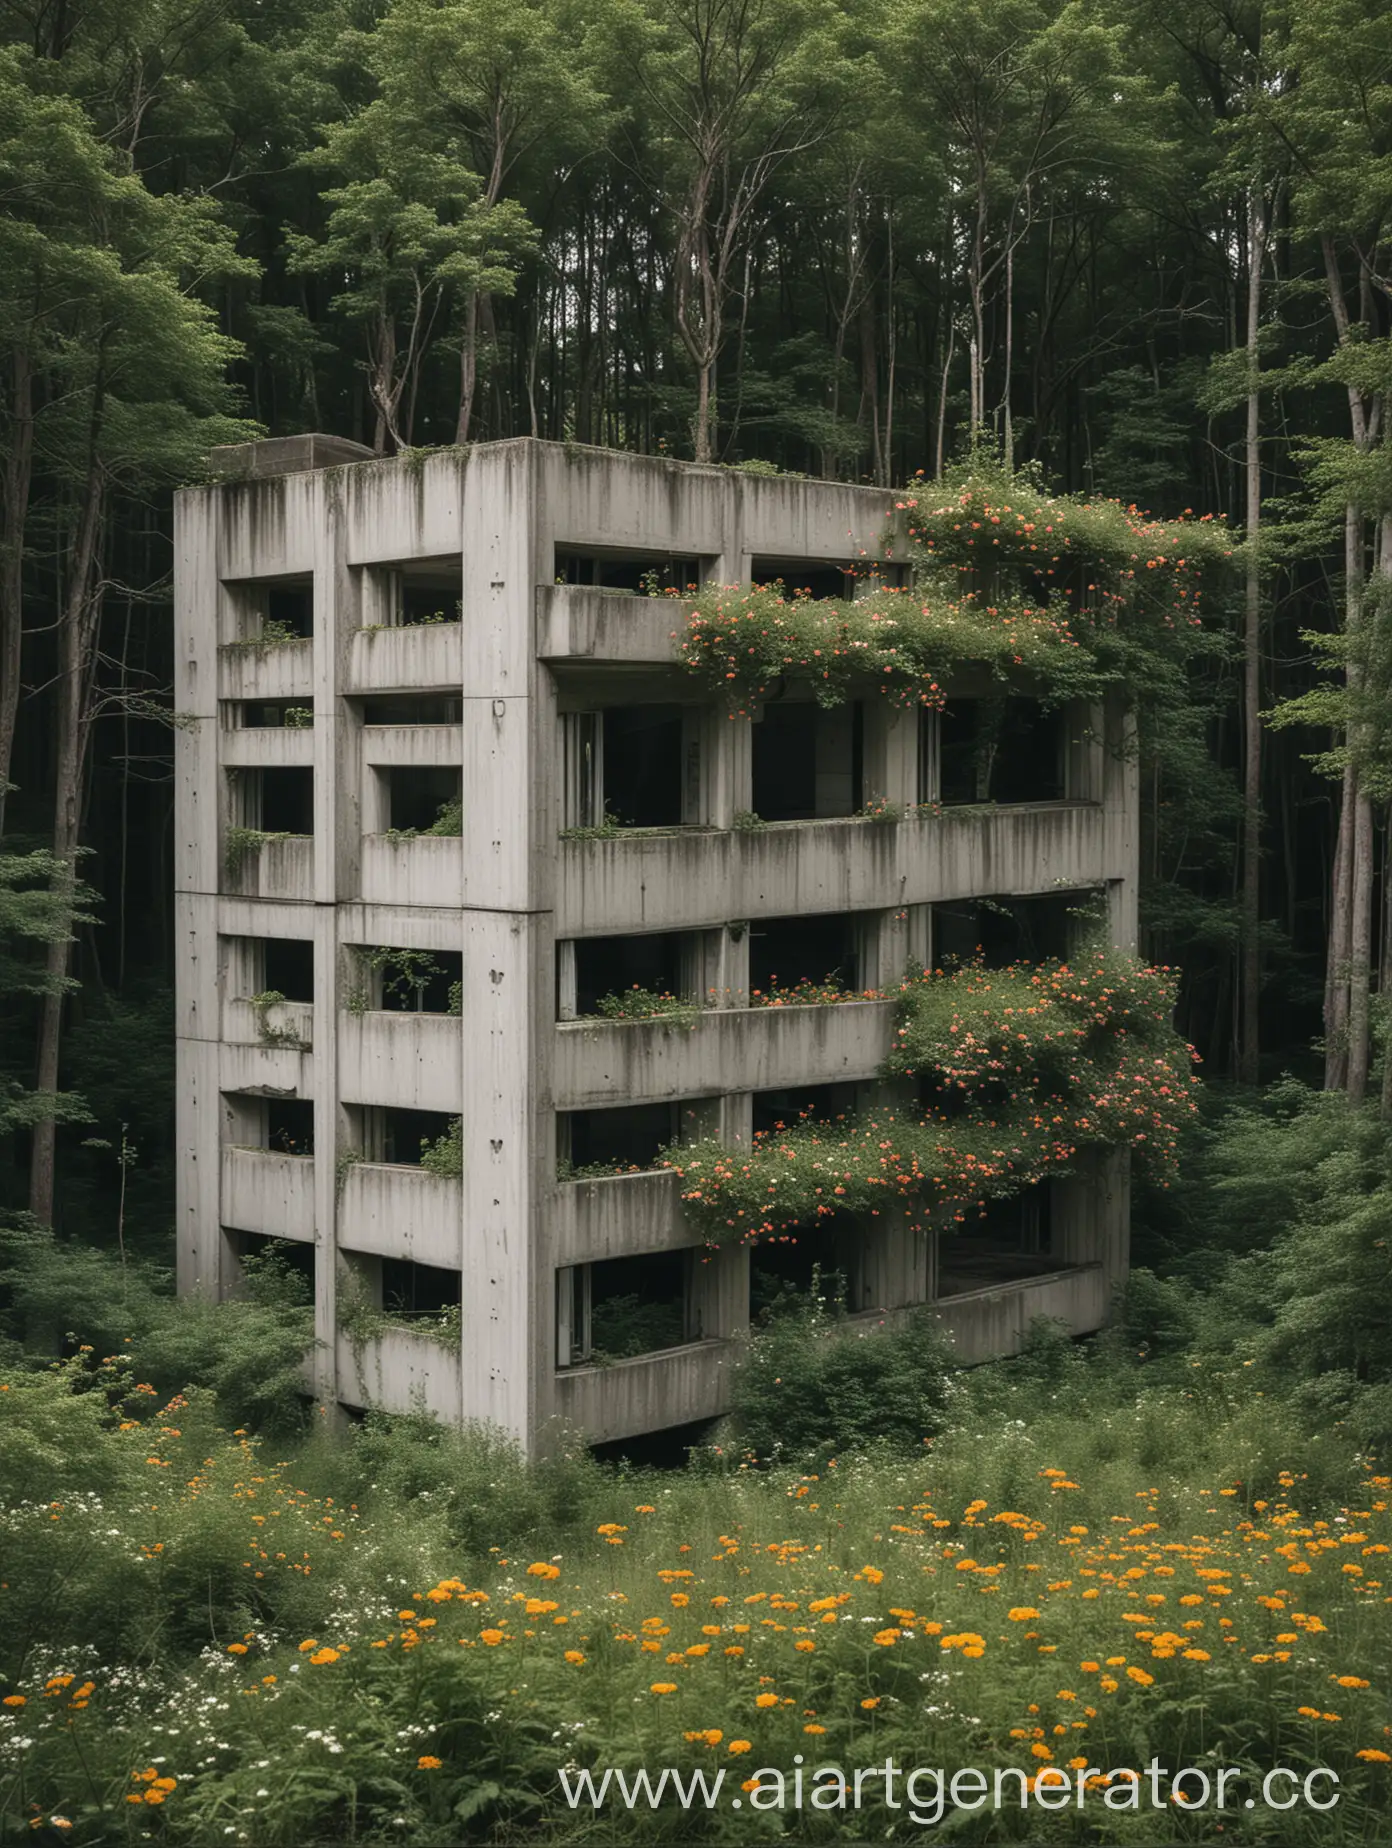 An abandoned concrete building in the middle of a forest that's already in bloom